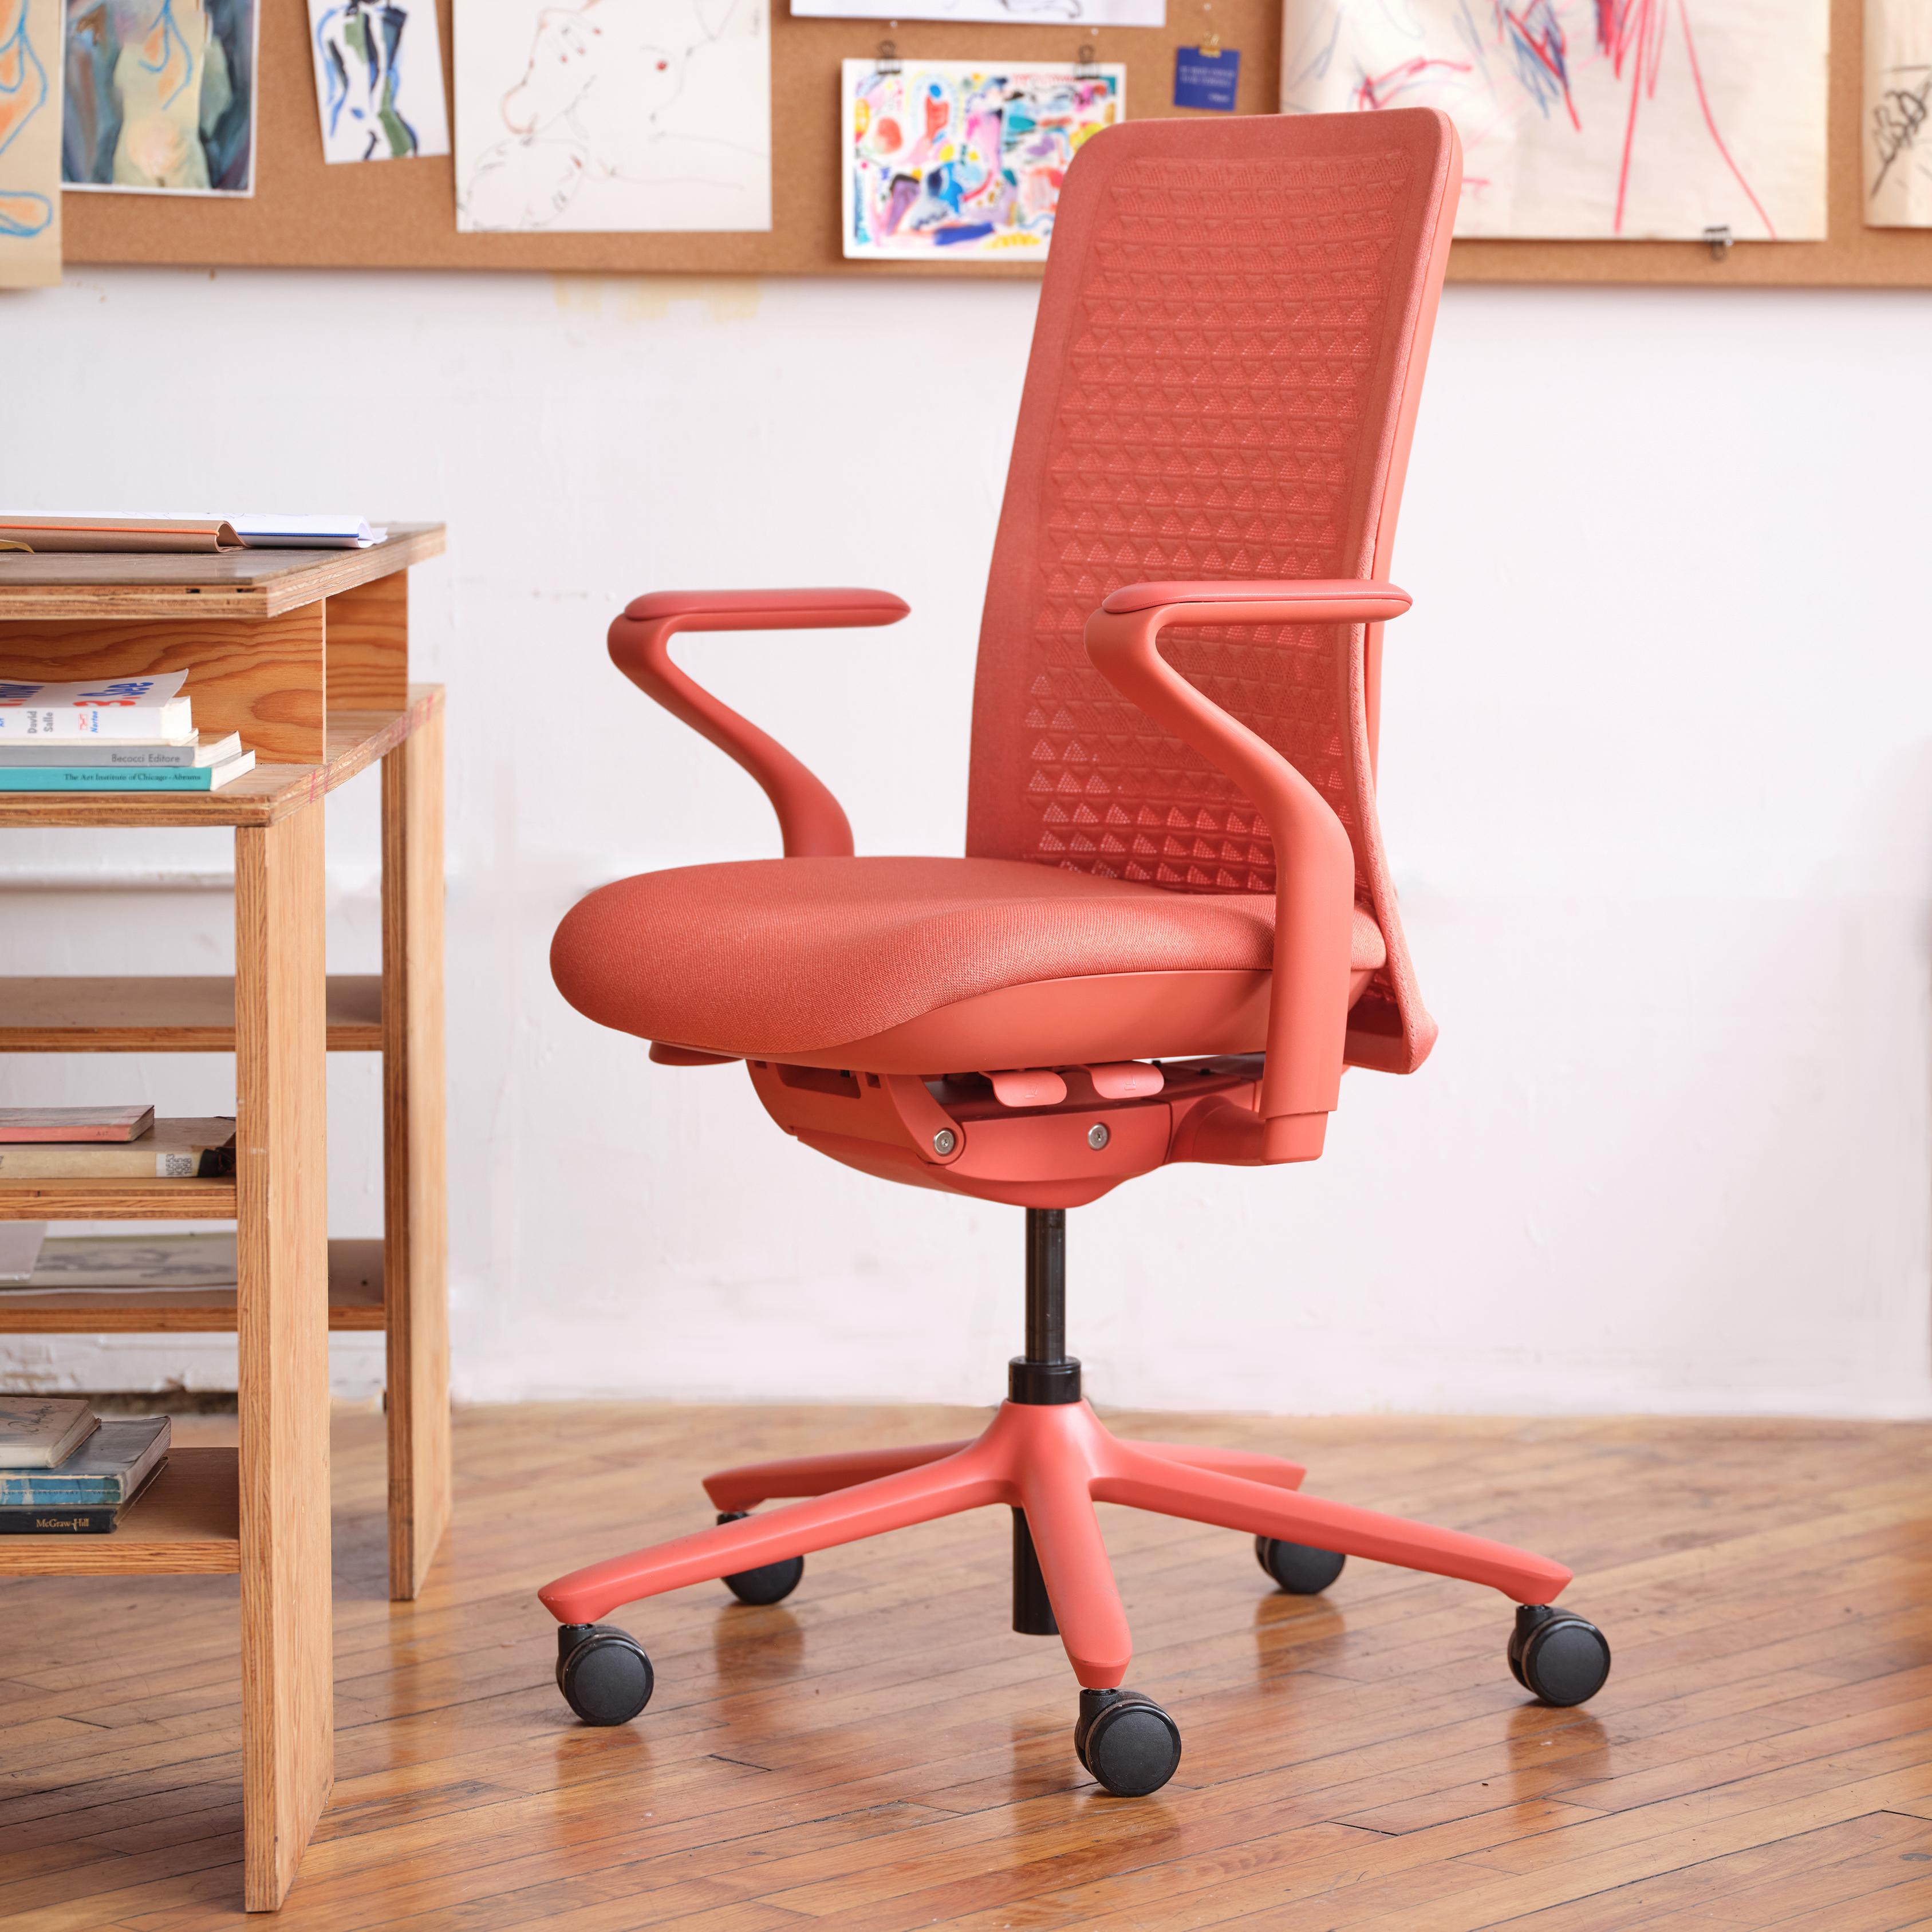 The coral-colored Verve Chair in front of a wooden desk setup.